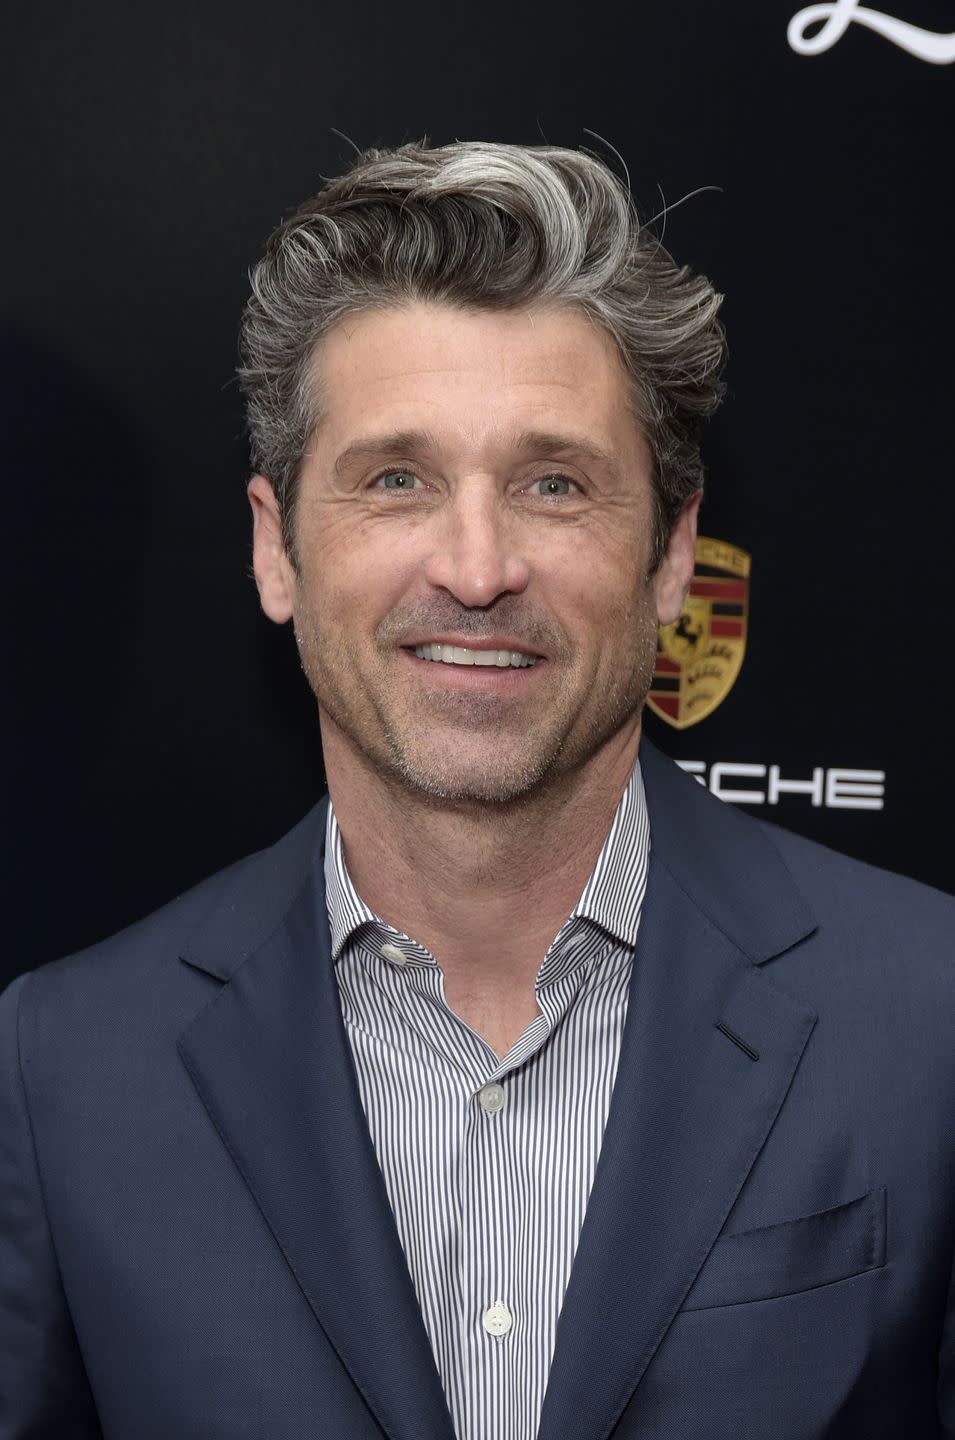 <p>Since wrapping up his time on <em>Grey's Anatomy</em> in 2015, the 54-year-old actor has spent much of his time bouncing between roles in various television projects, including <em>The Truth About the Harry Quebert Affair</em> (2018) and the upcoming <em>Devils</em>. </p>